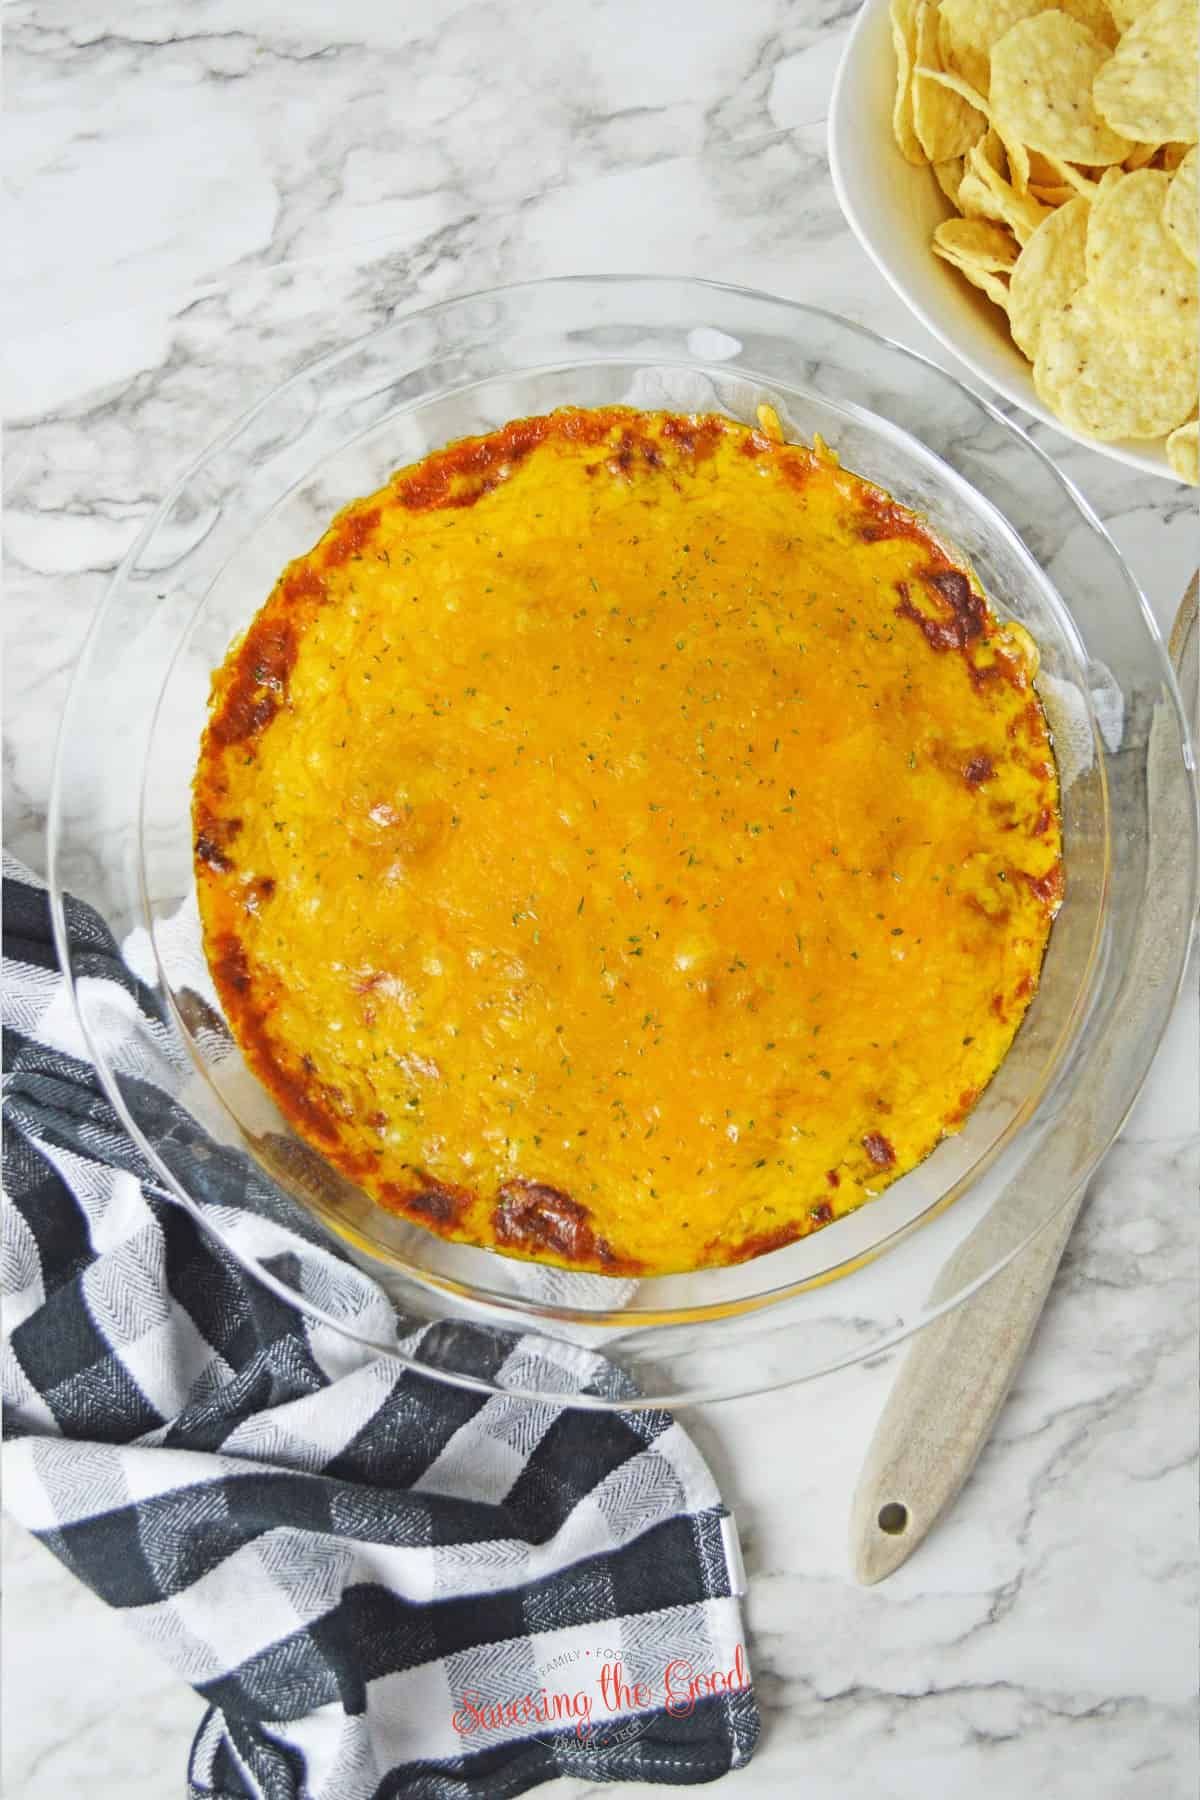 Creamy hormel chili cheese dip in a glass bowl.